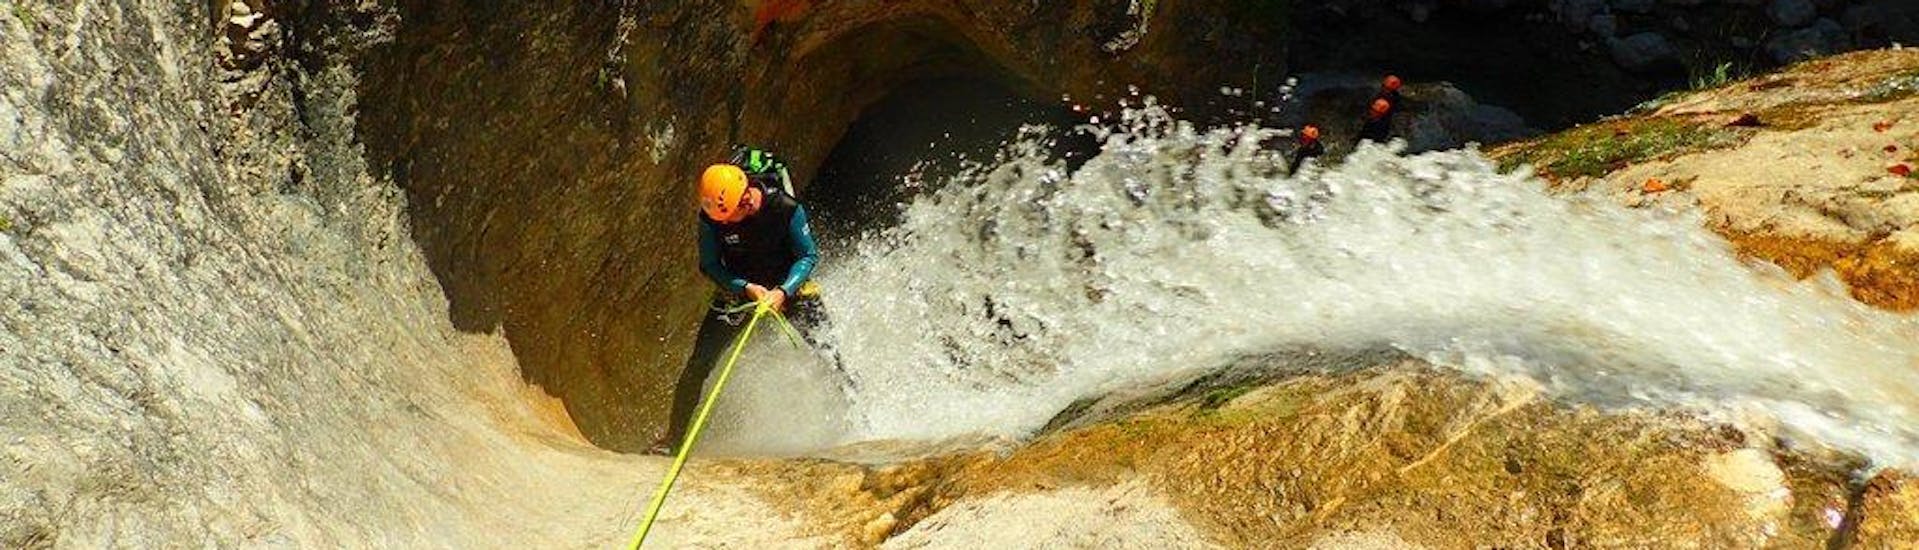 A man abseiling down a waterfall on his Canoying "Vertical" Tour in Fischbach with Torrent Outdoor Experience.